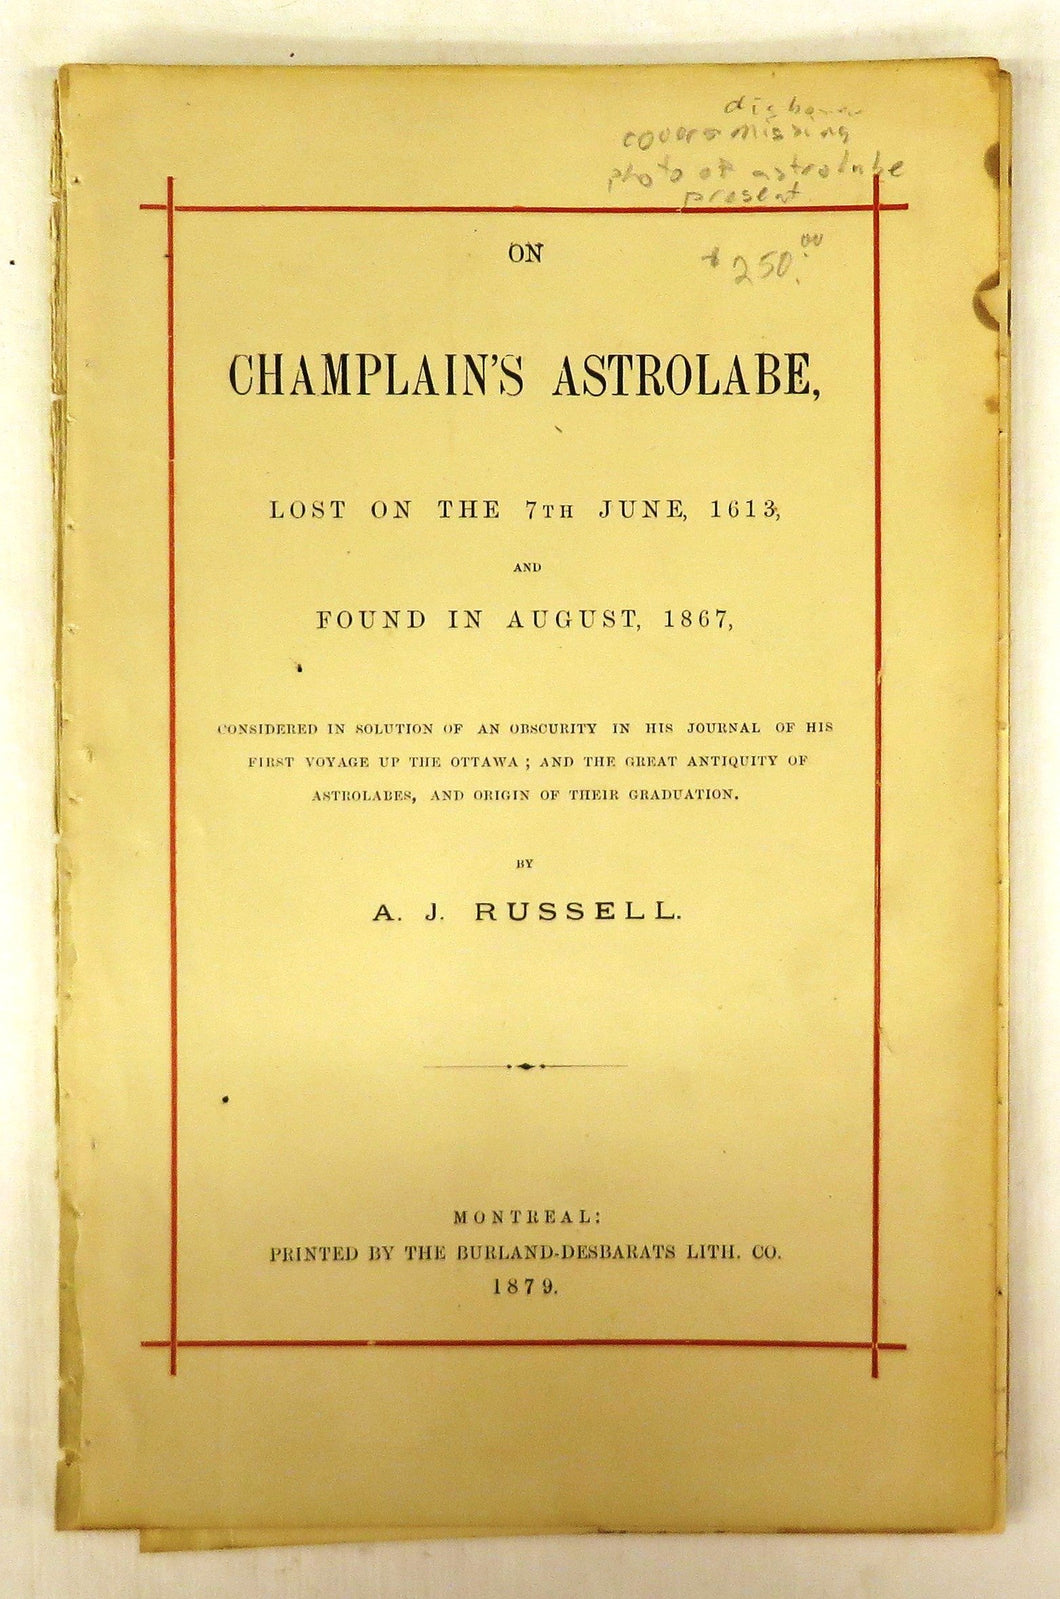 On Champlain's Astrolabe, Lost on the 7th June, 1613, and Found in August, 1867